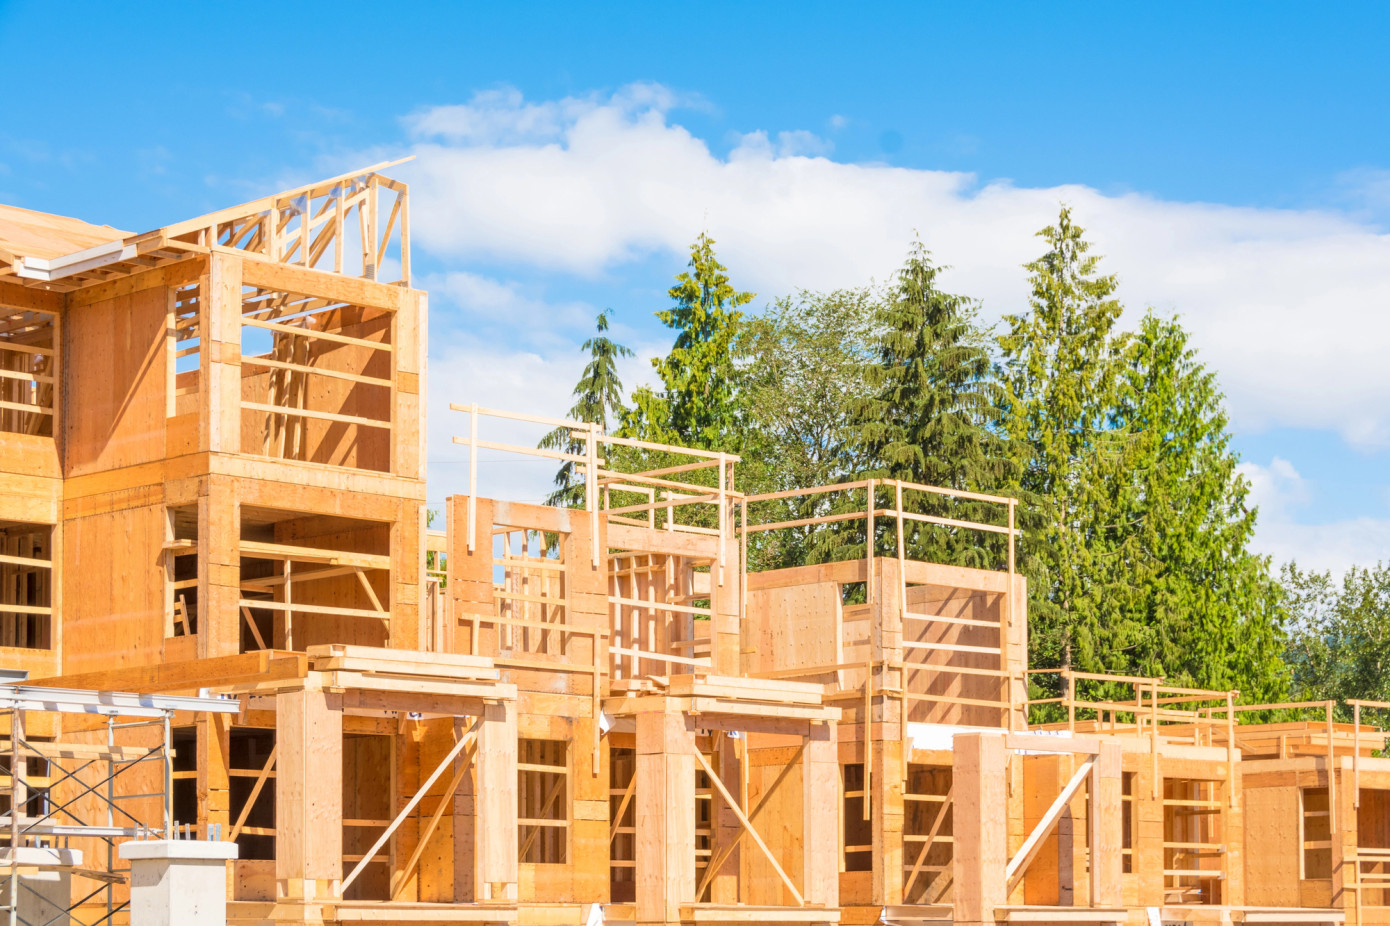 May building permits and housing starts show significant decline